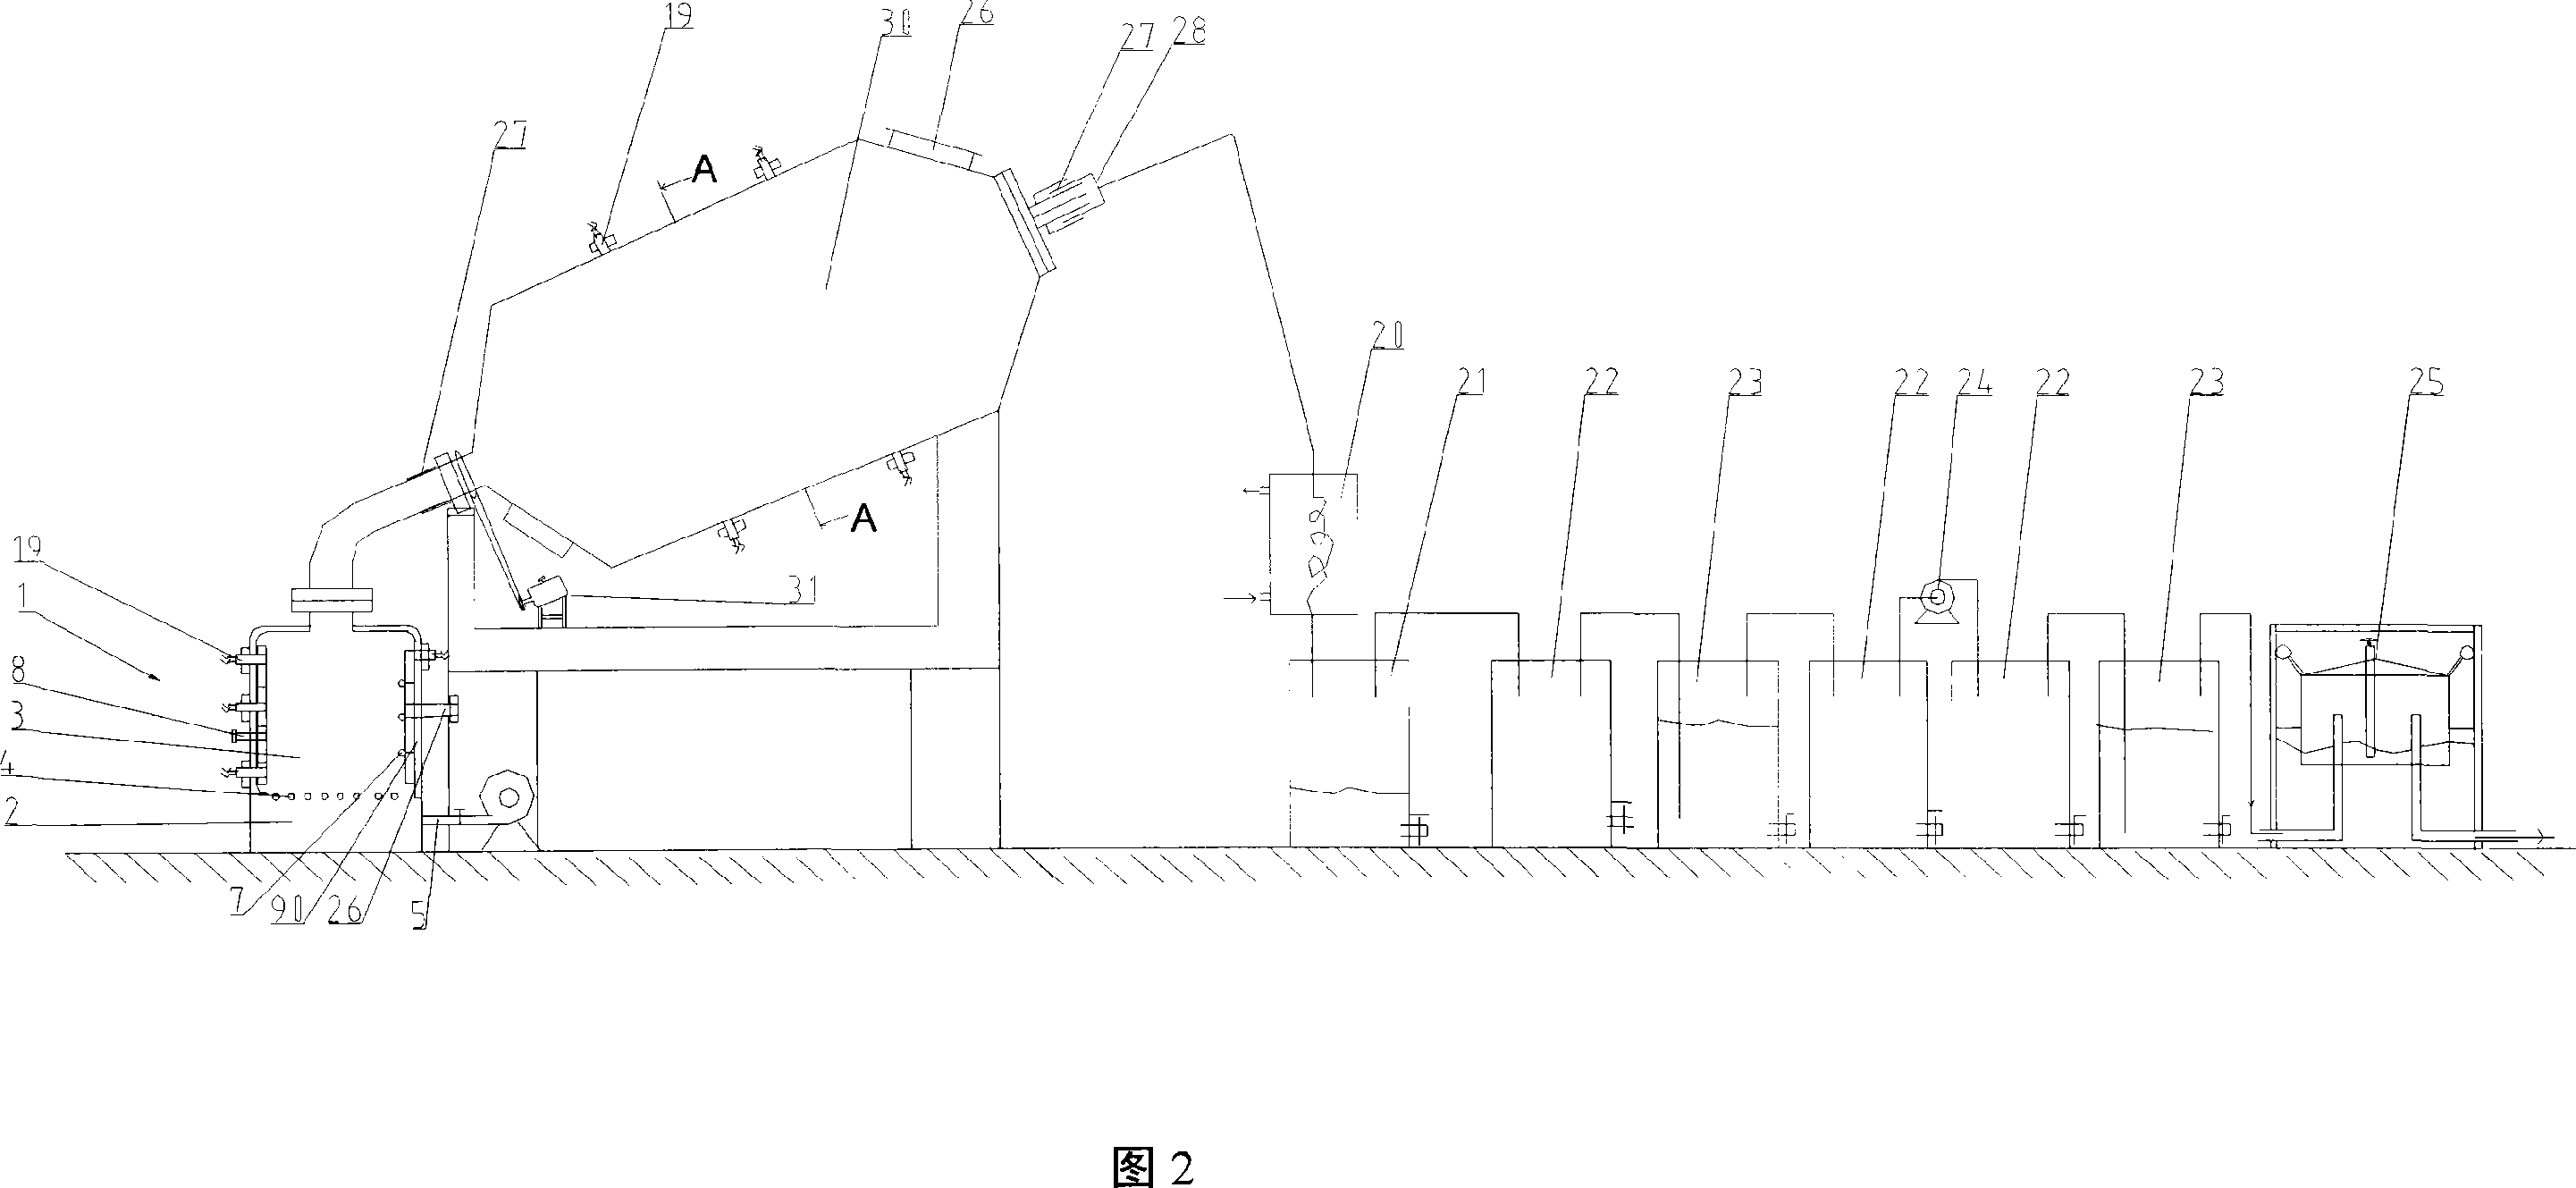 Synthesizing method and equipment for fabricating light ground substance by using farming and forestry biolobic material